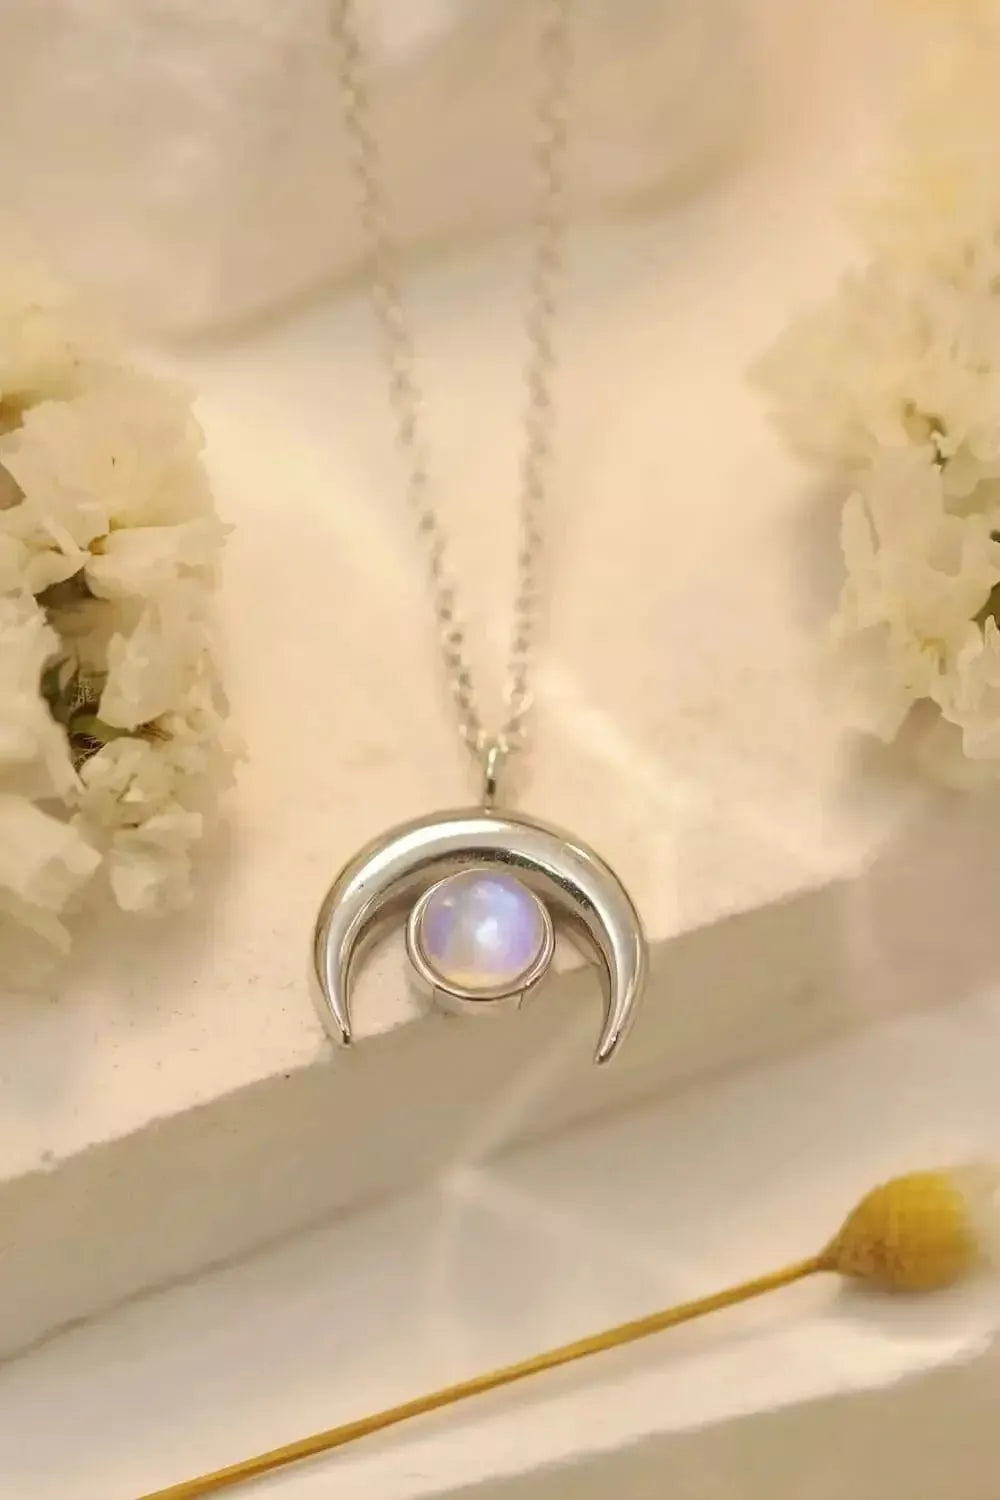 High Quality Natural Moonstone Moon Pendant 925 Sterling Silver Necklace - Godiva Oya Bey